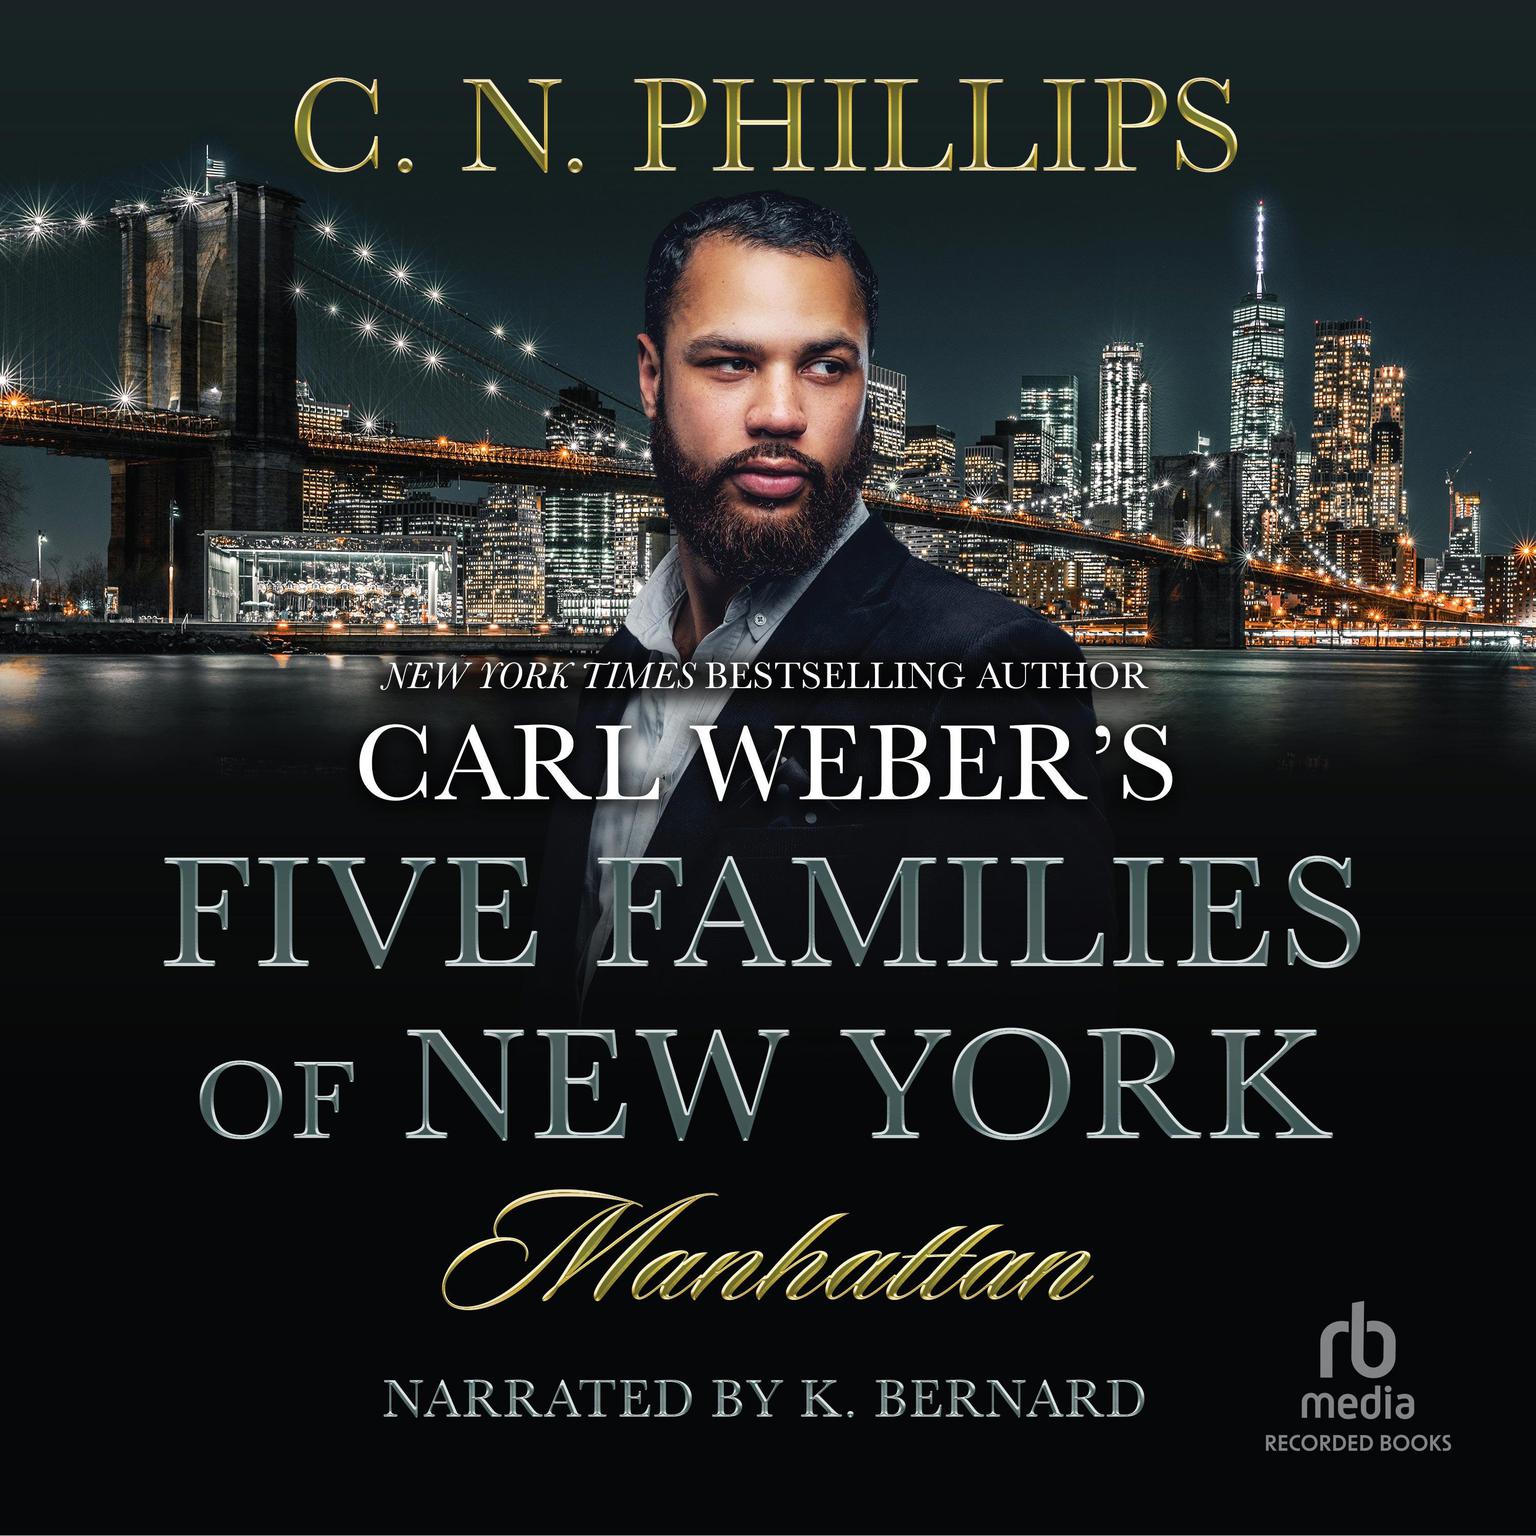 Carl Webers Five Families of New York: Manhattan: Carl Webers Five Families of New York Audiobook, by C. N. Phillips